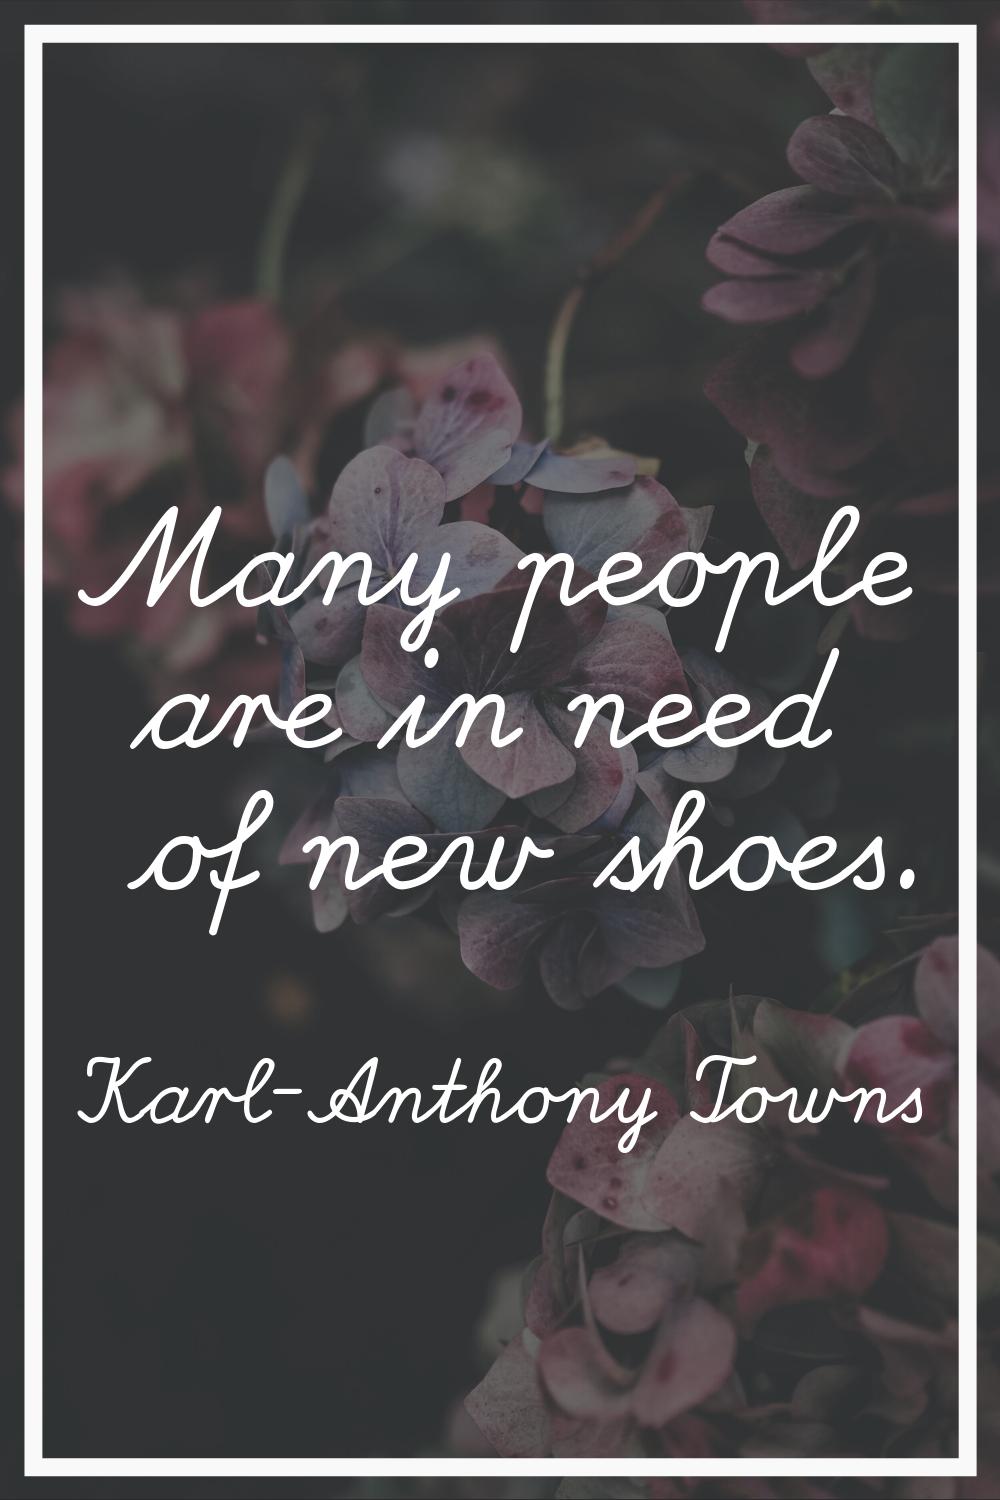 Many people are in need of new shoes.